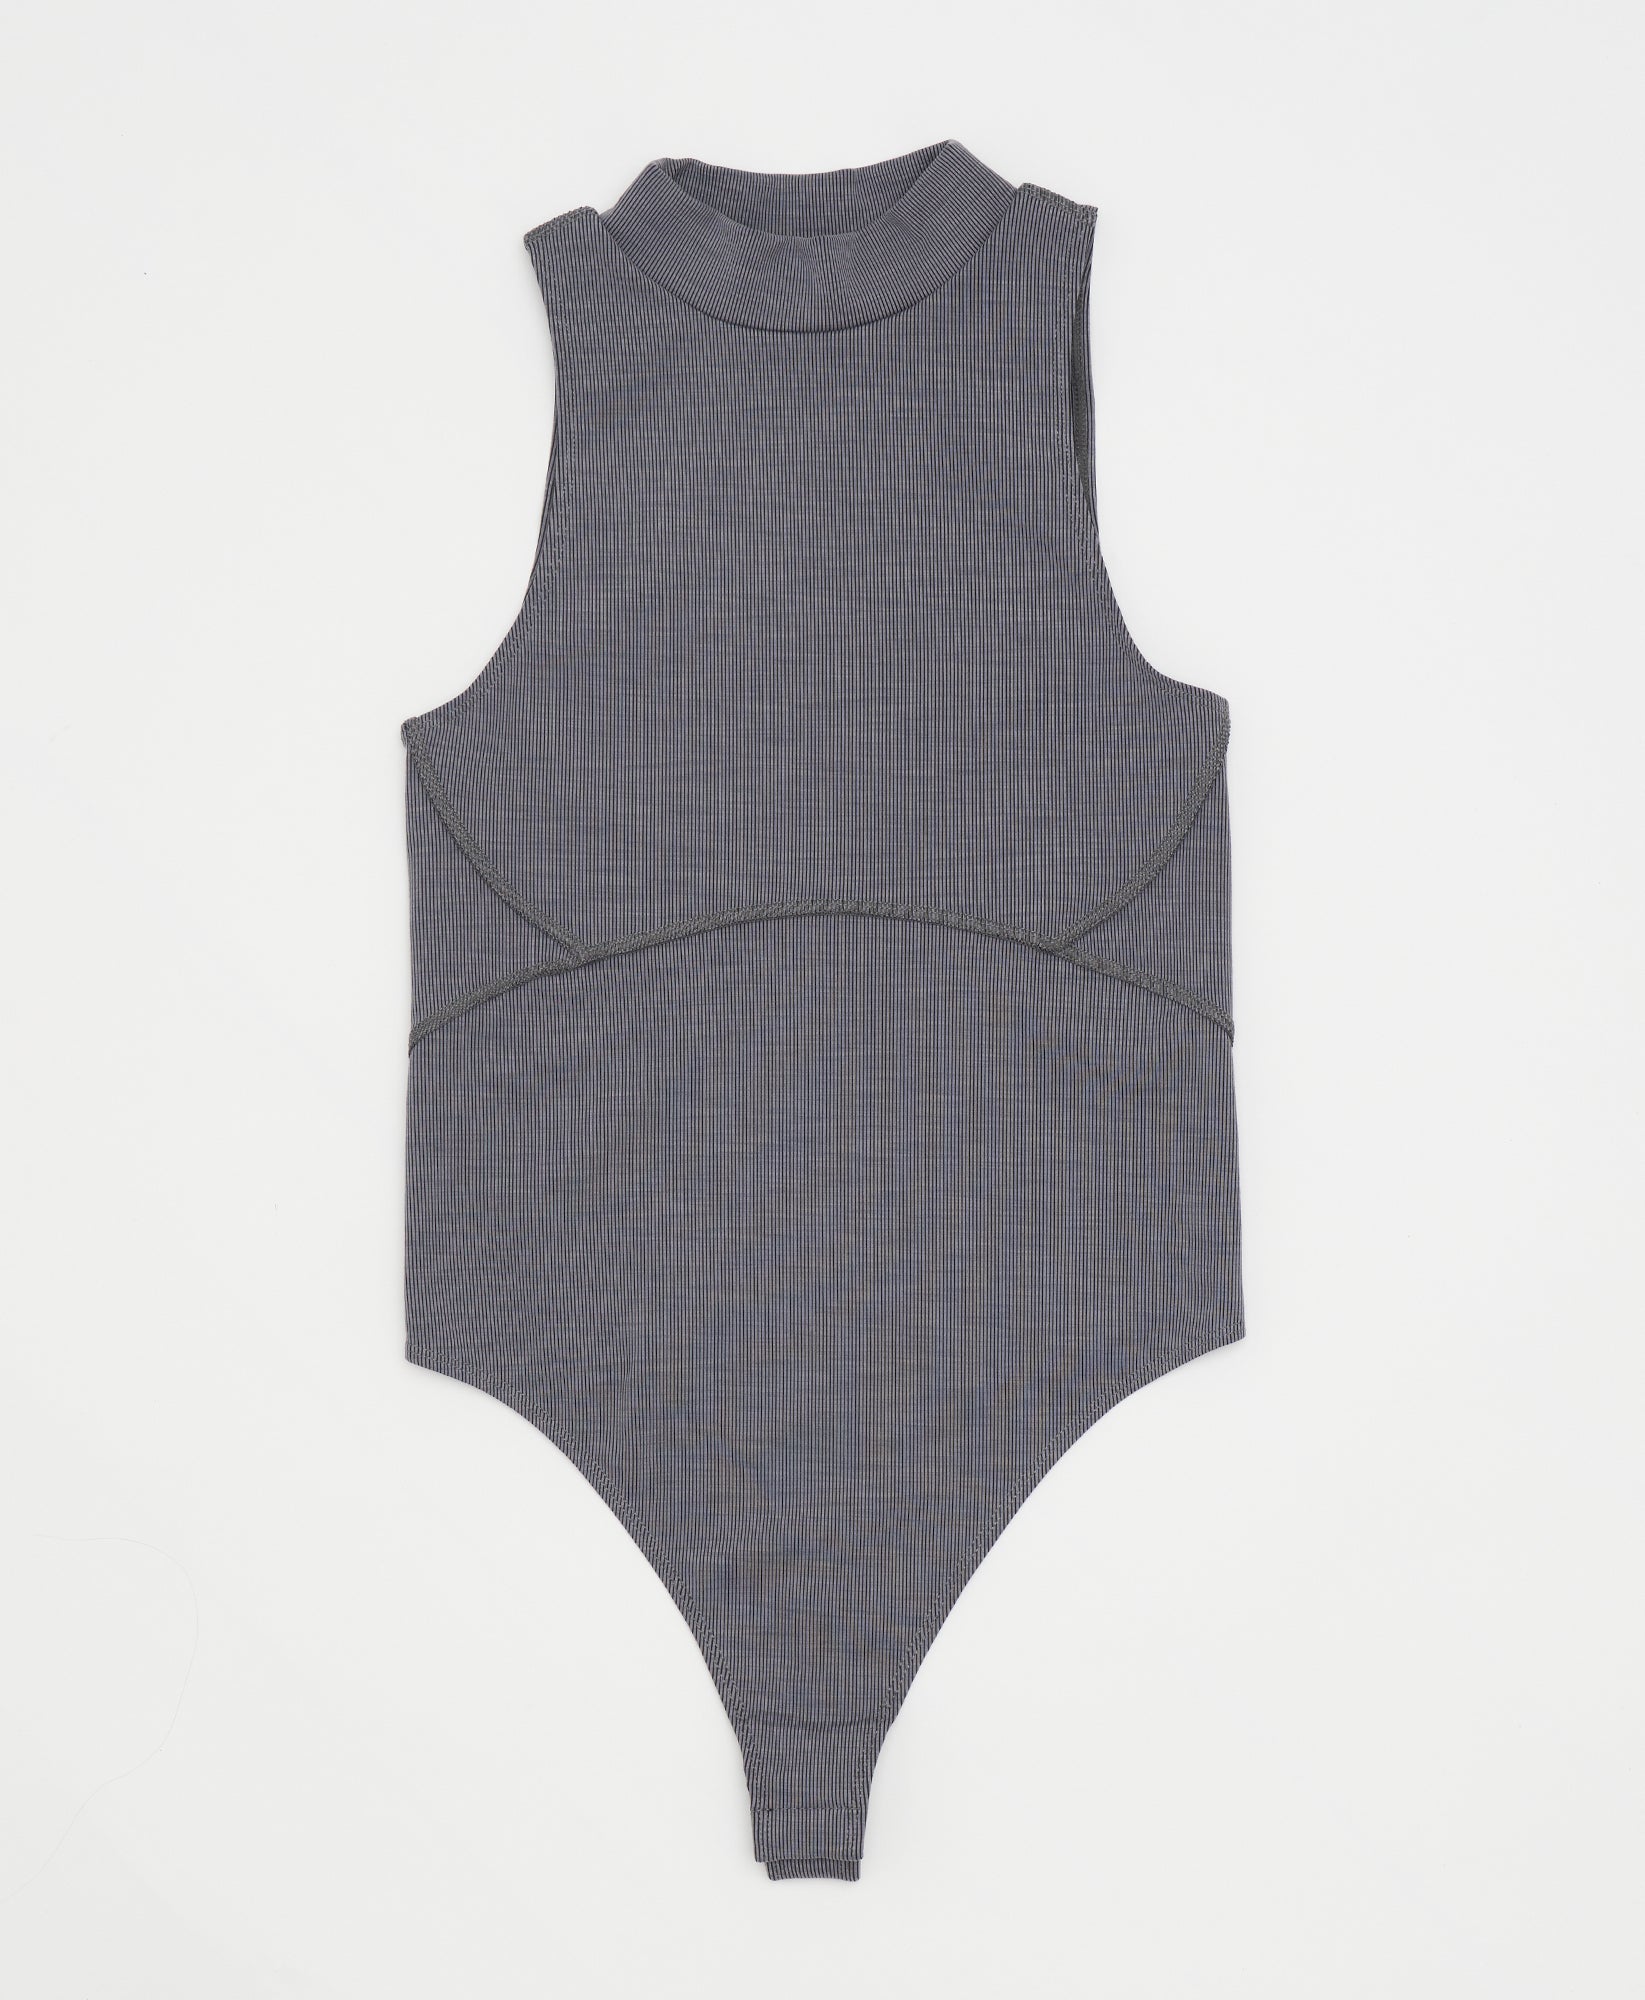 Wear One's At Aerobic Rib Bodysuit in Charcoal Flat Front